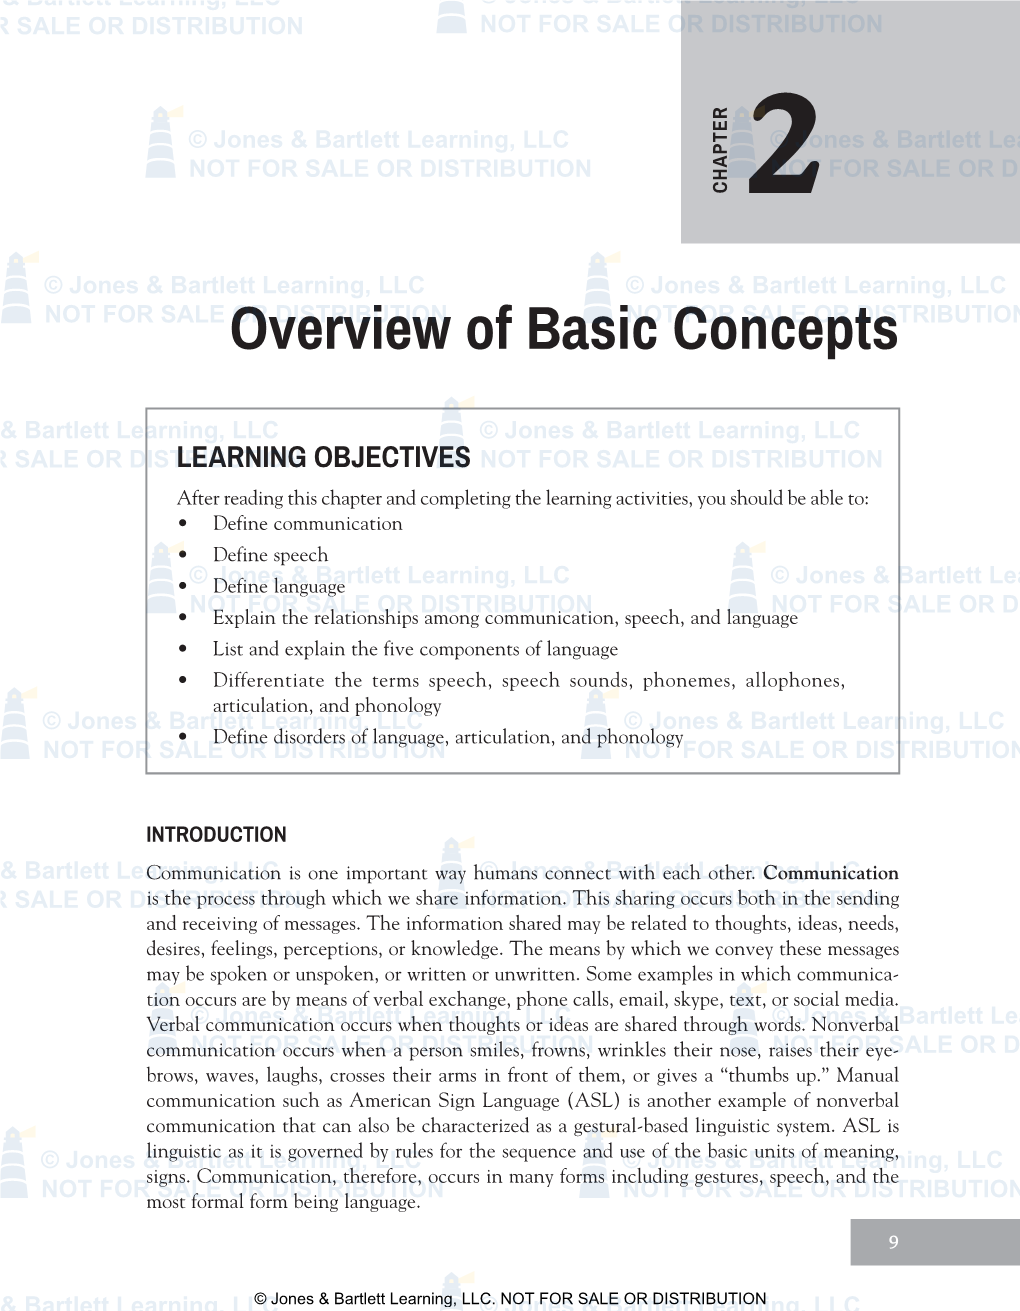 Overview of Basic Concepts